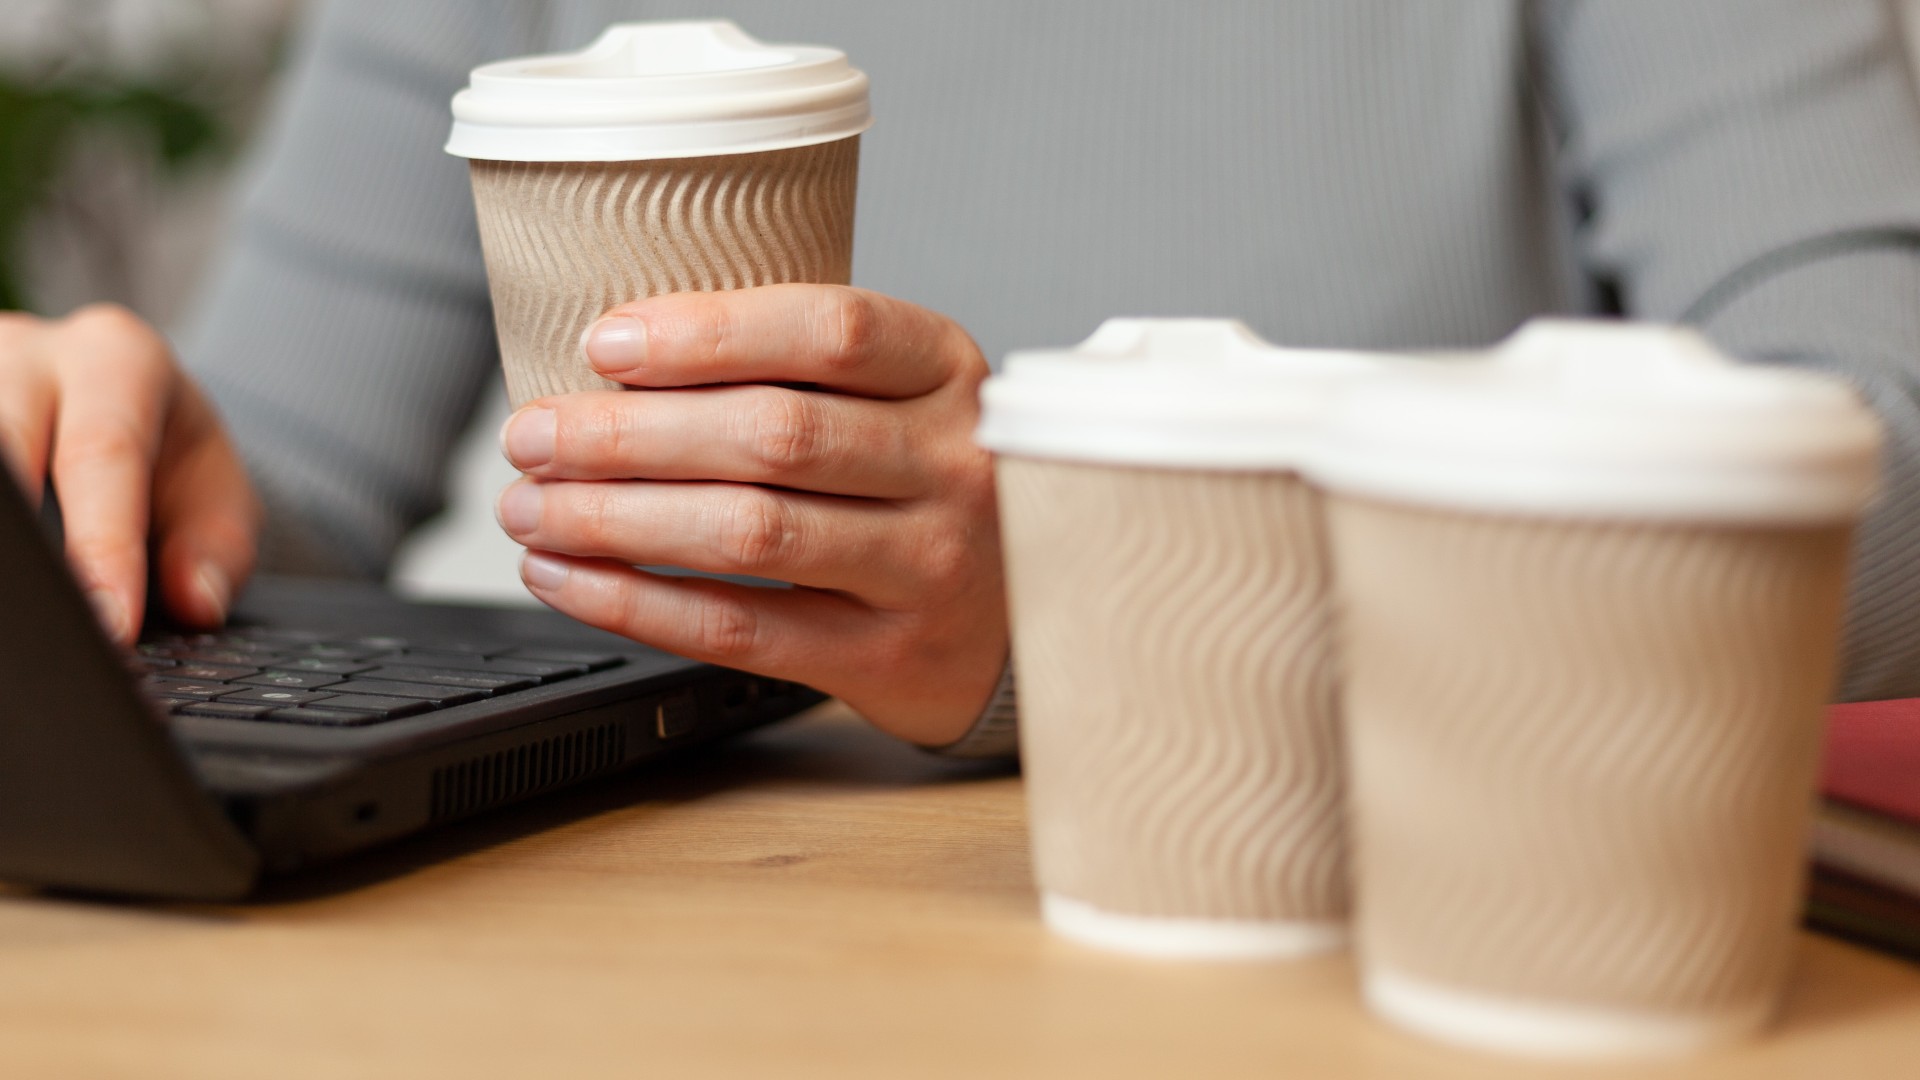 Close up of person working on laptop and drinking coffee in a paper cup, with two more paper cups next to them.